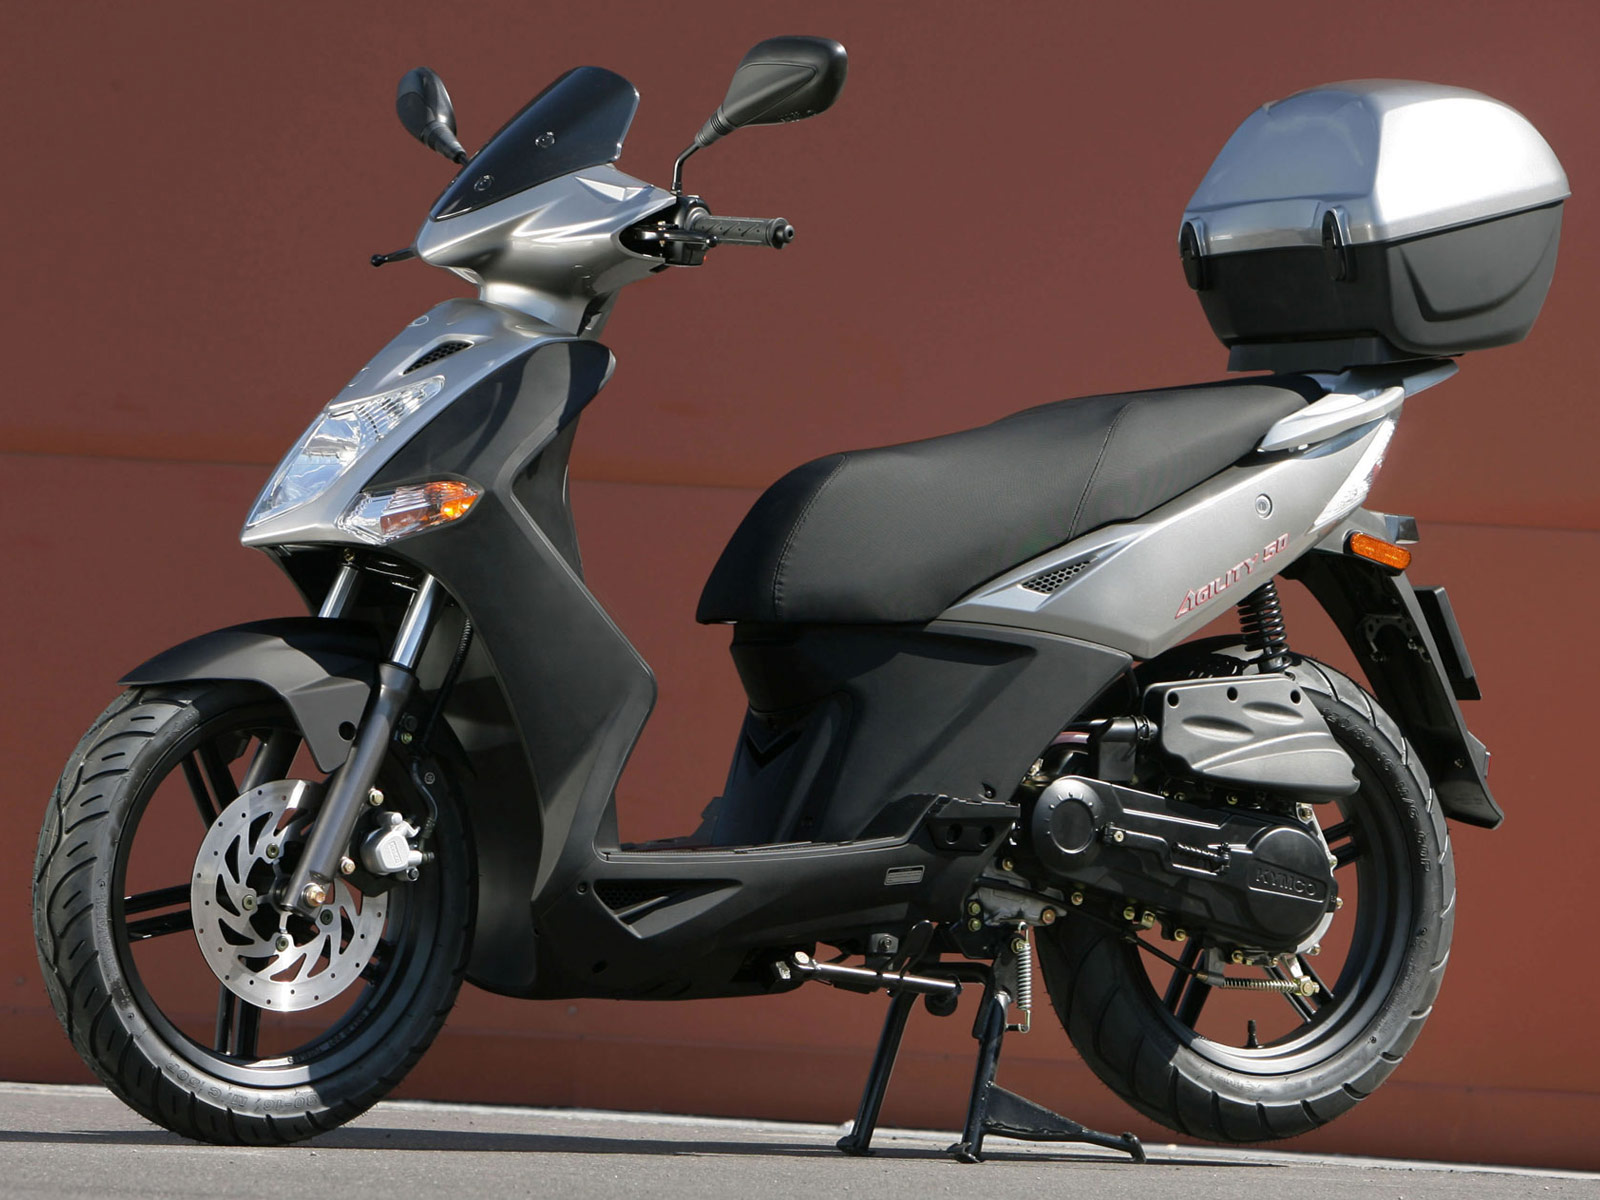 2012 Kymco Agility City 50 4T Motorcycle Insurance Information